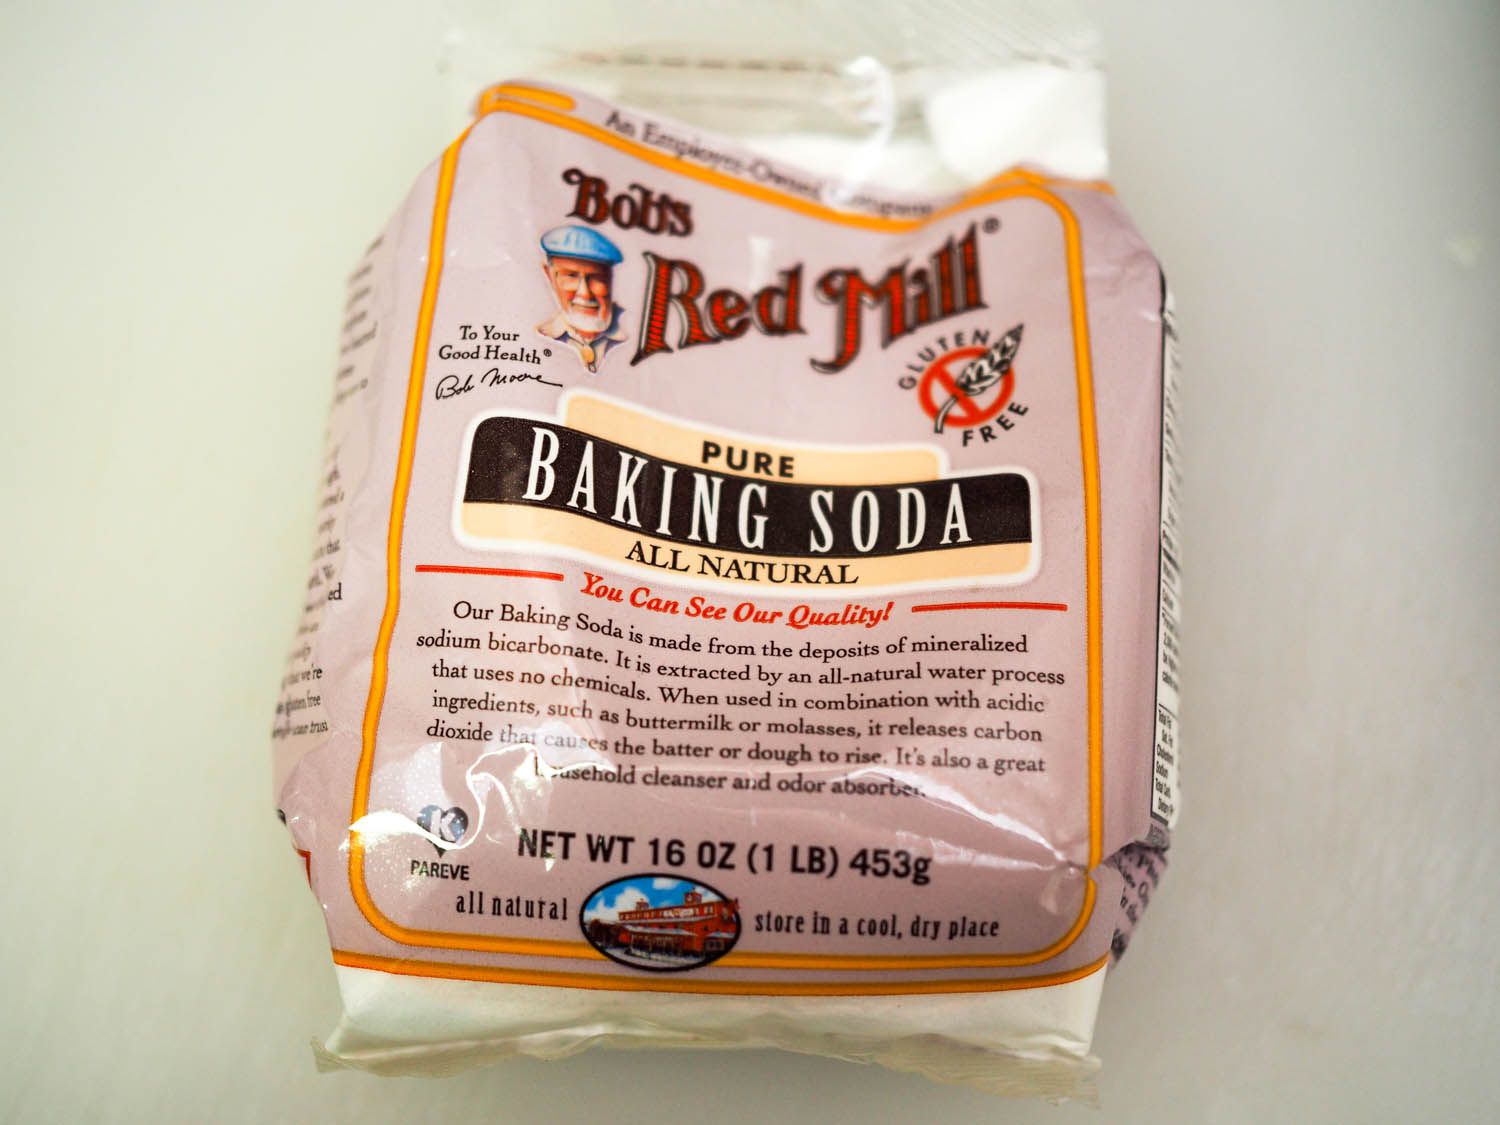 A bag of Bob's Red Mill baking soda.